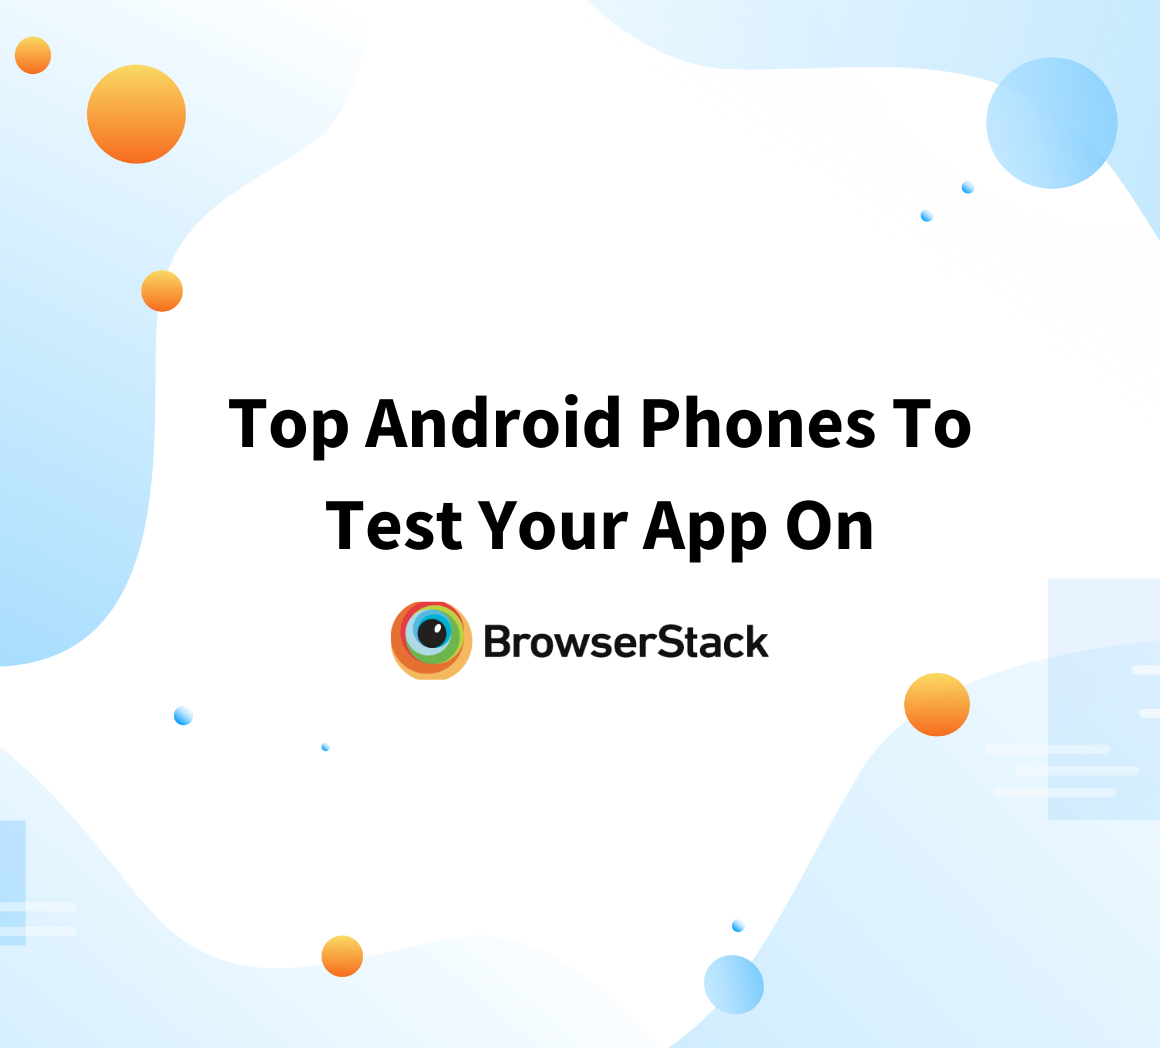 Top Android Phones To Test Your App On